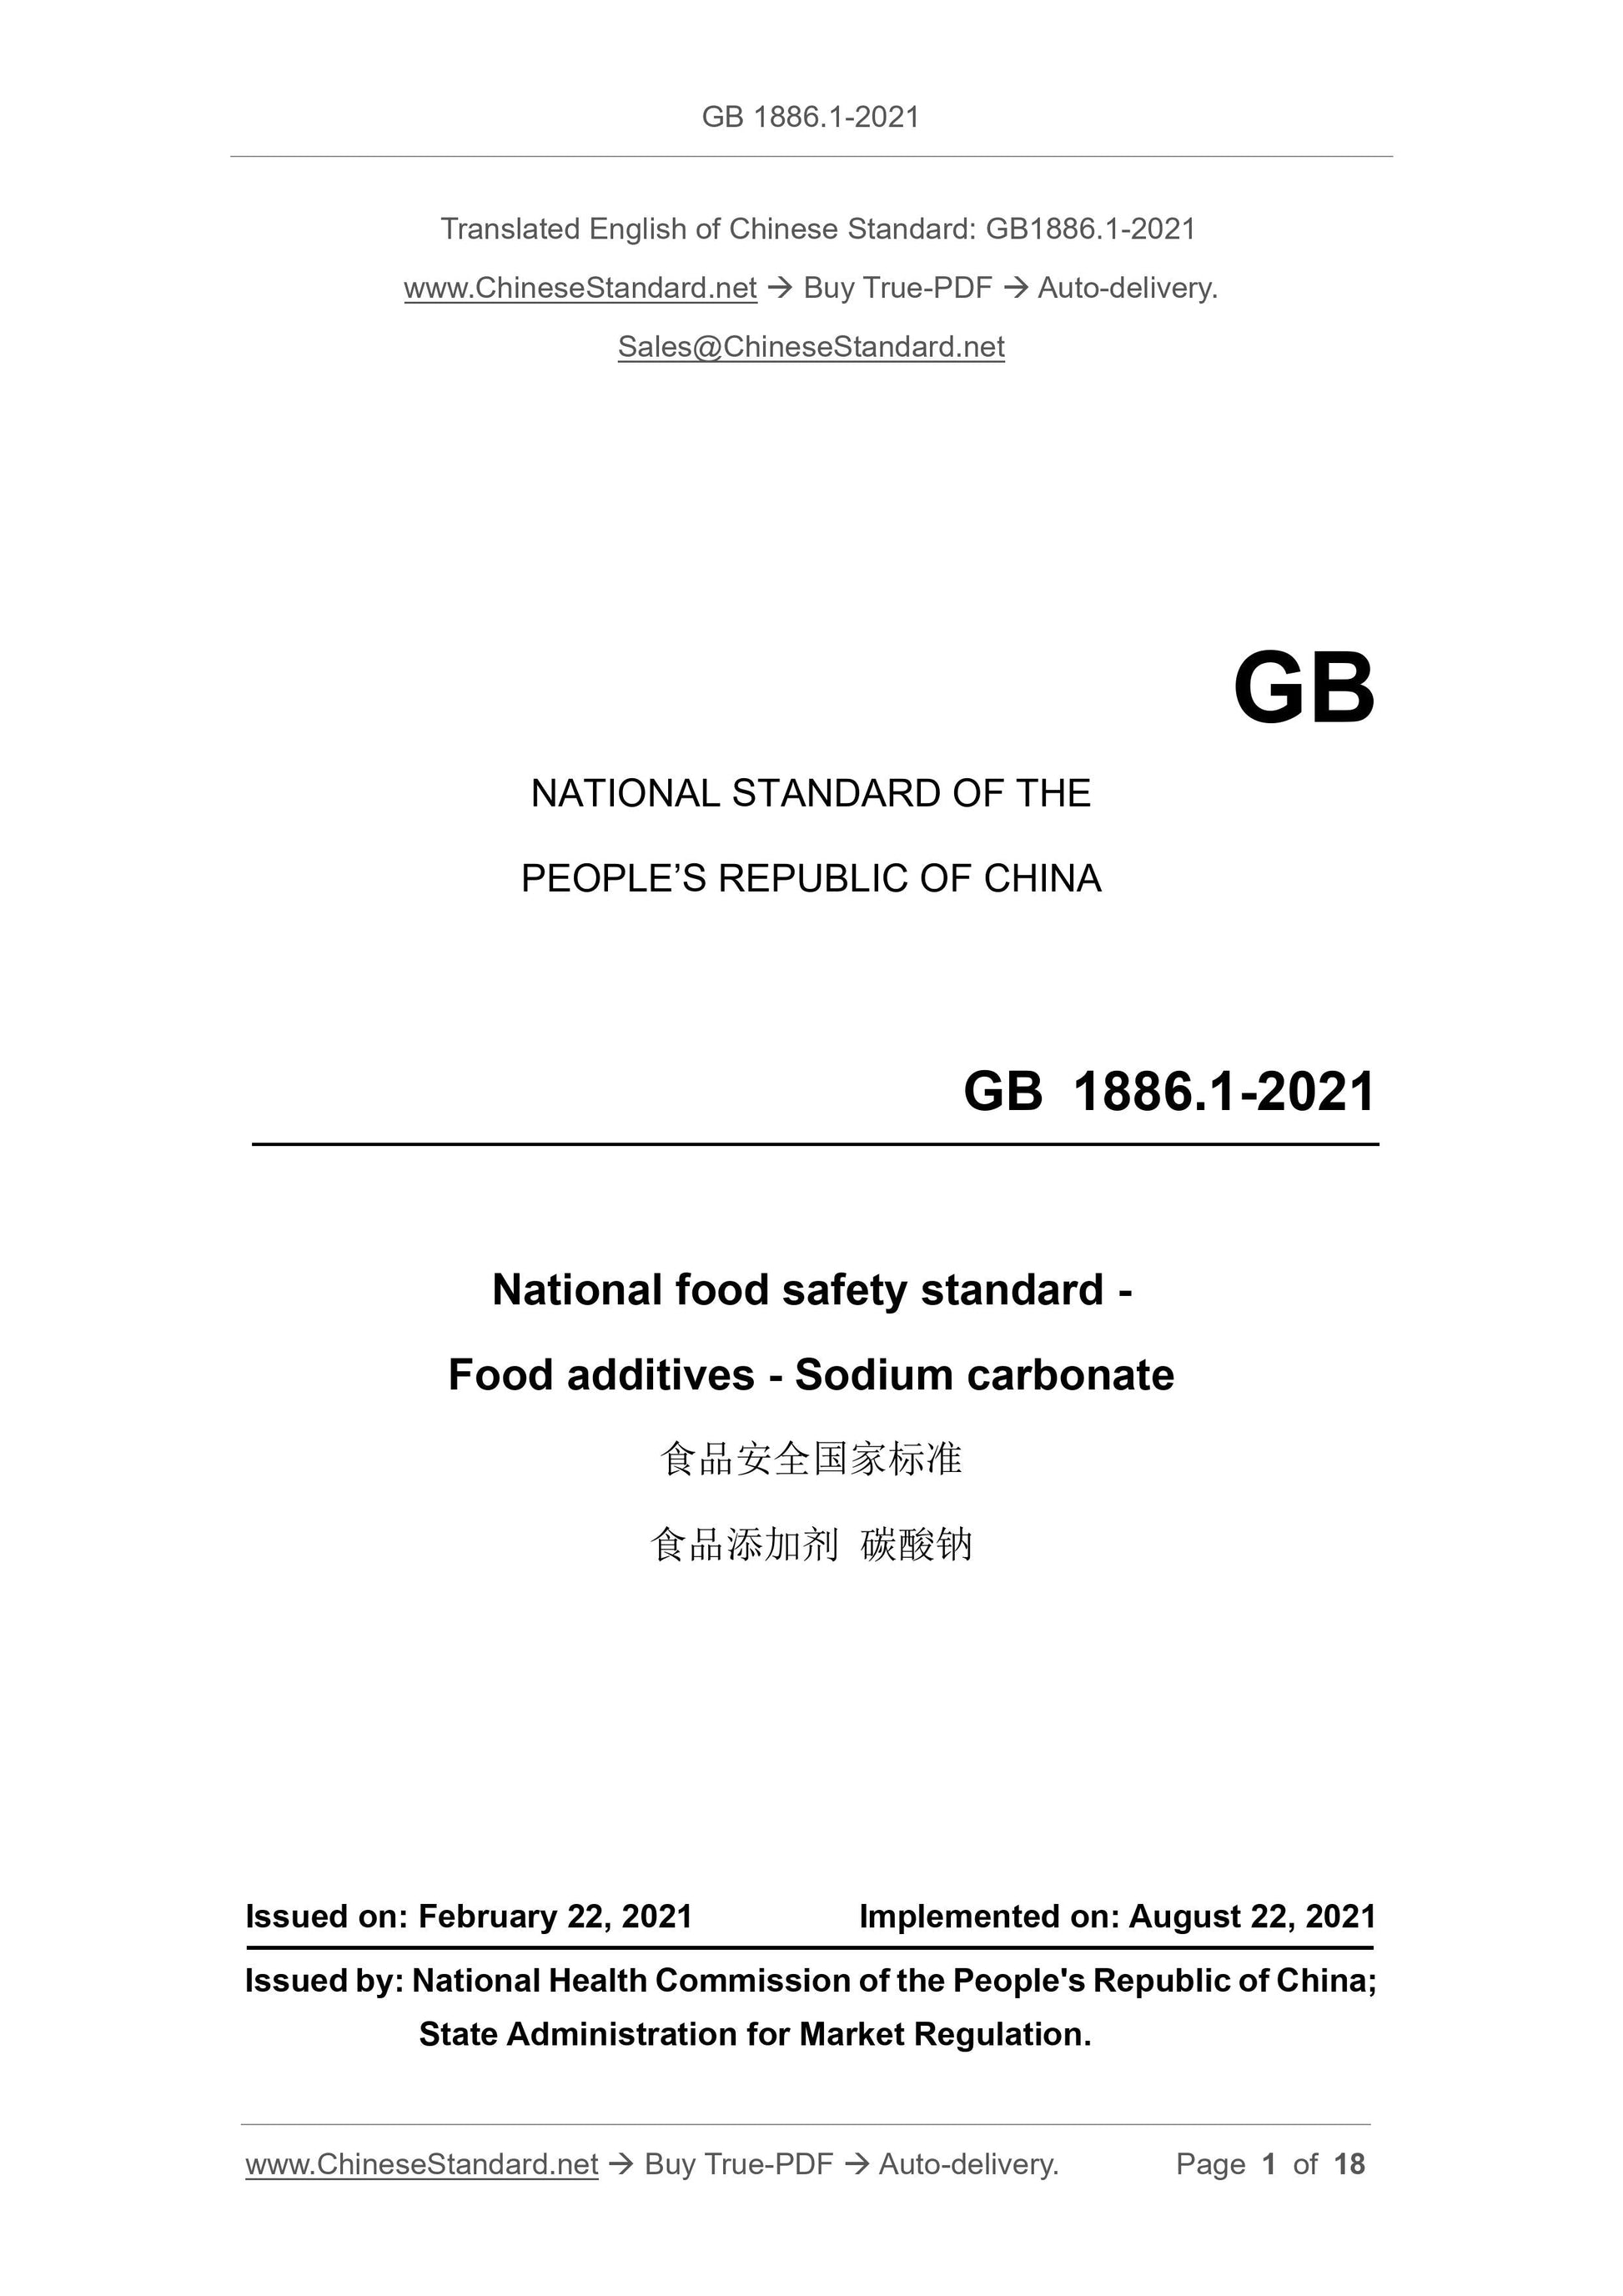 GB 1886.1-2021 Page 1